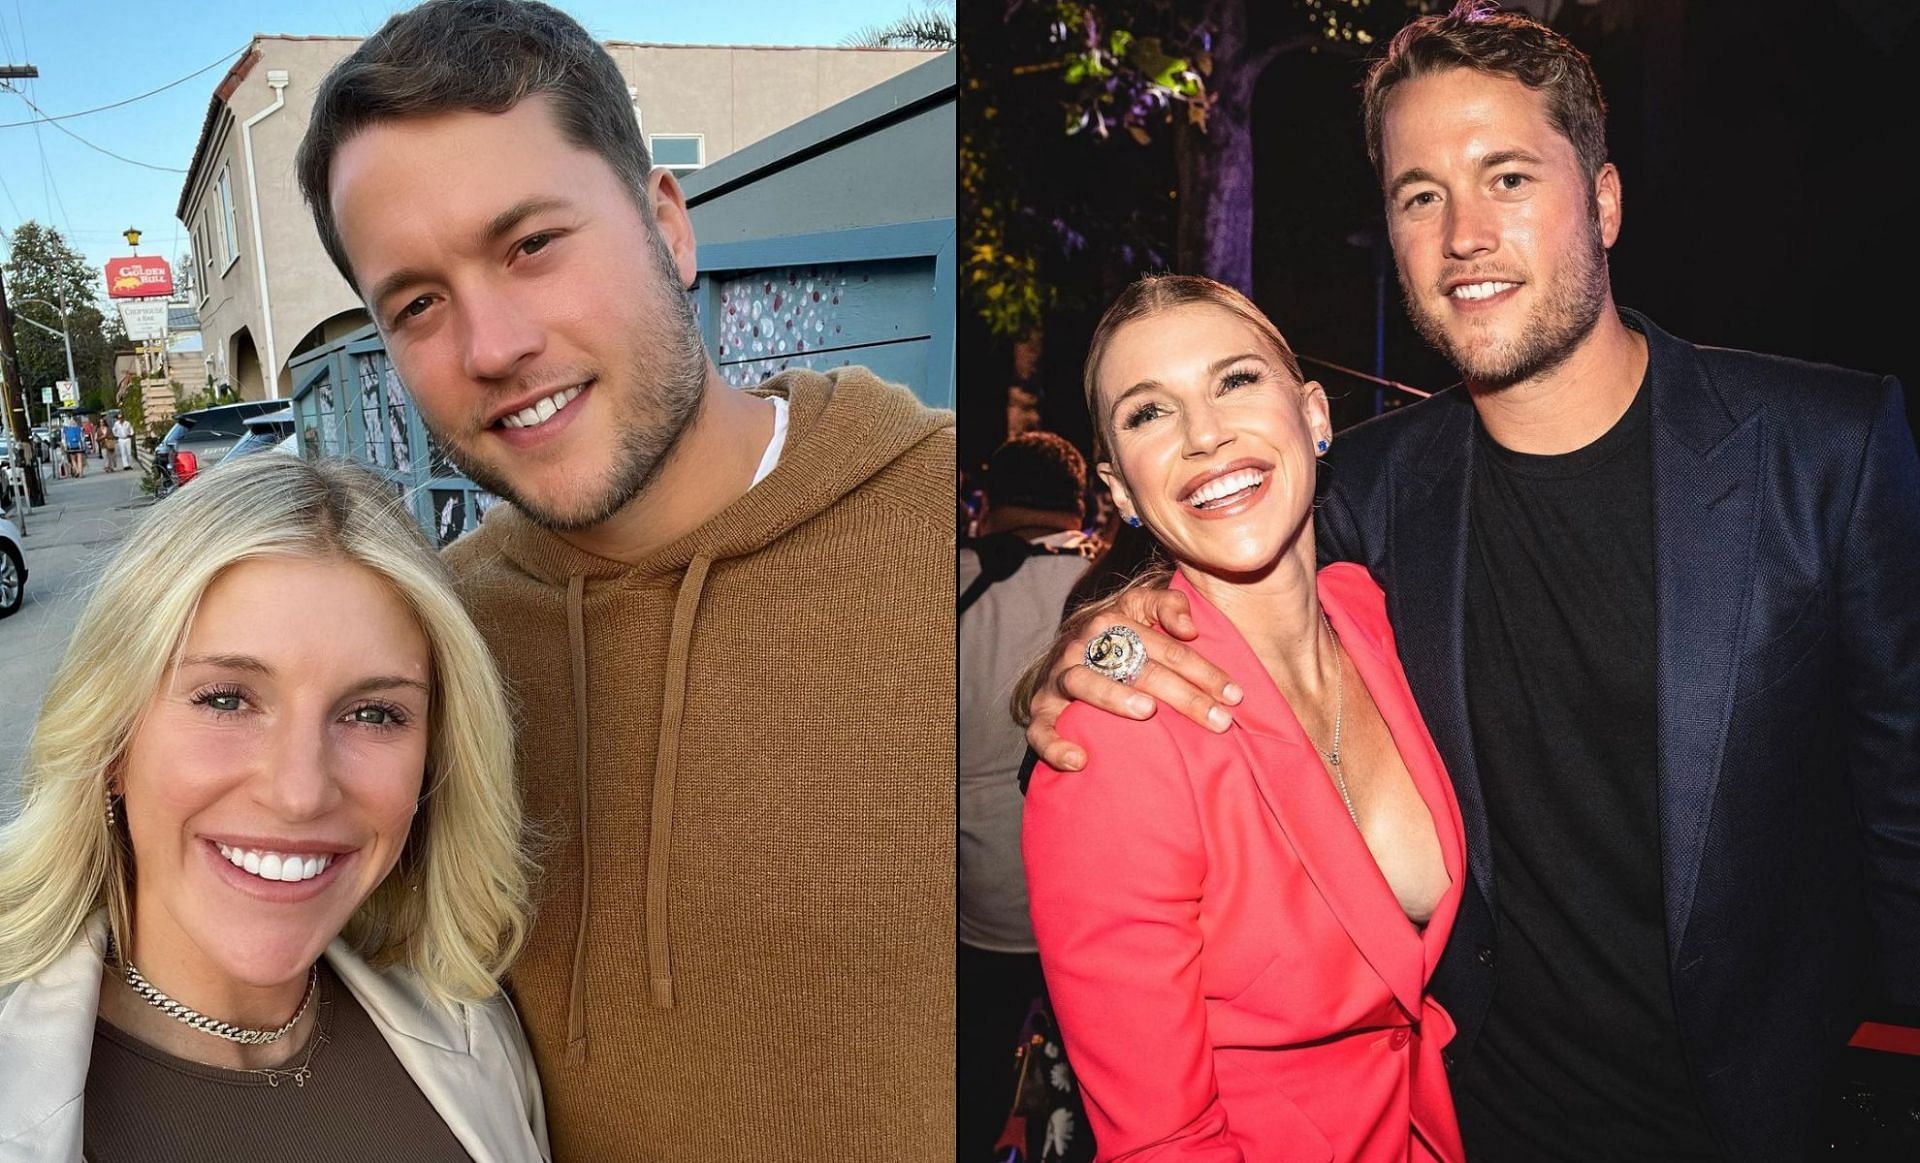 Matthew Stafford and his wife Kelly went to the same college